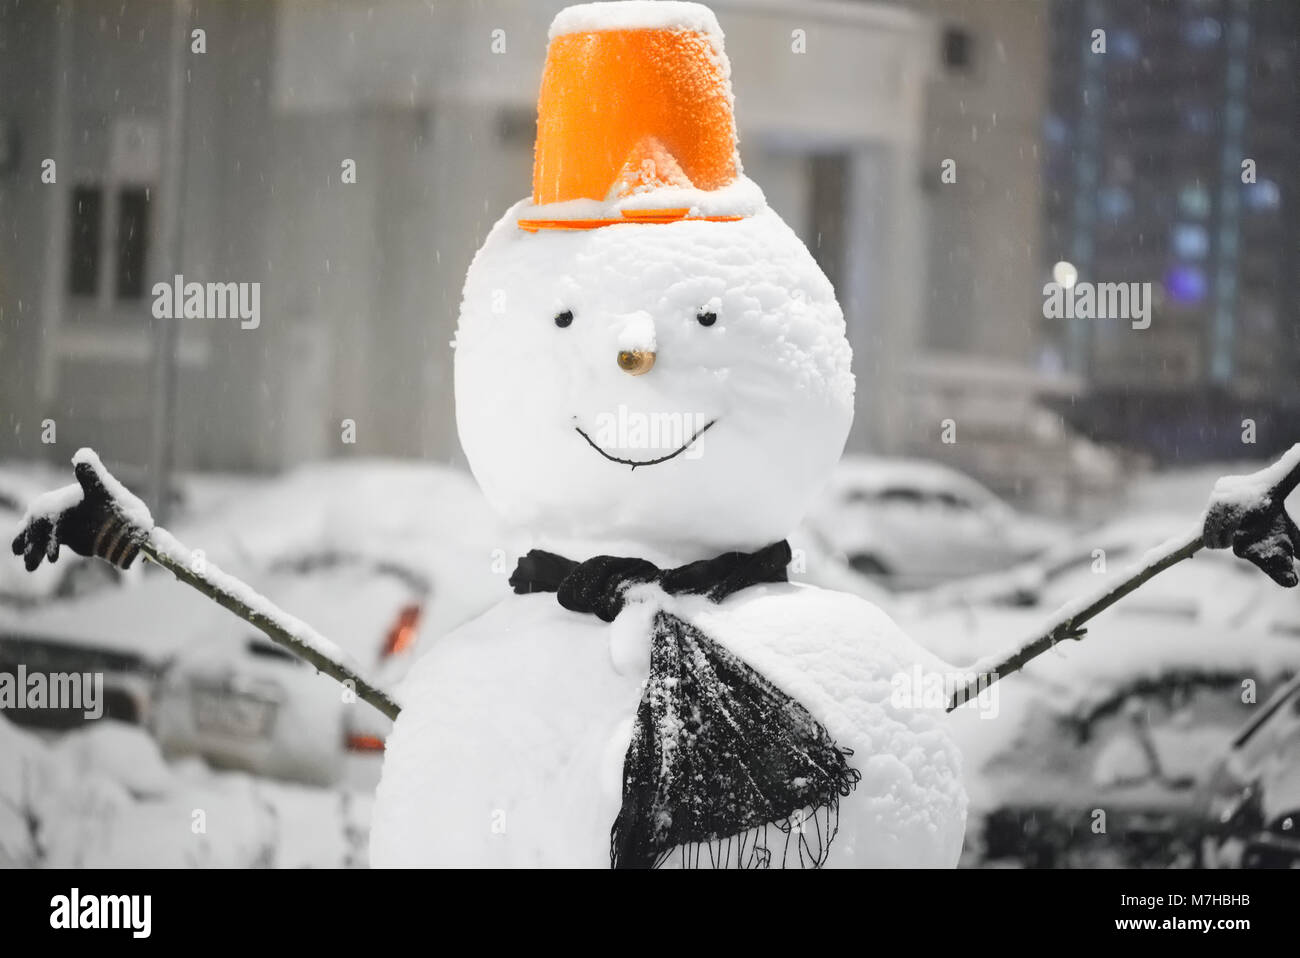 Snowman on a blurred background in gray with blue lights of the cityscape. Closeup of smiling snowman with orange hat, scarf and carrot nose, outdoors Stock Photo